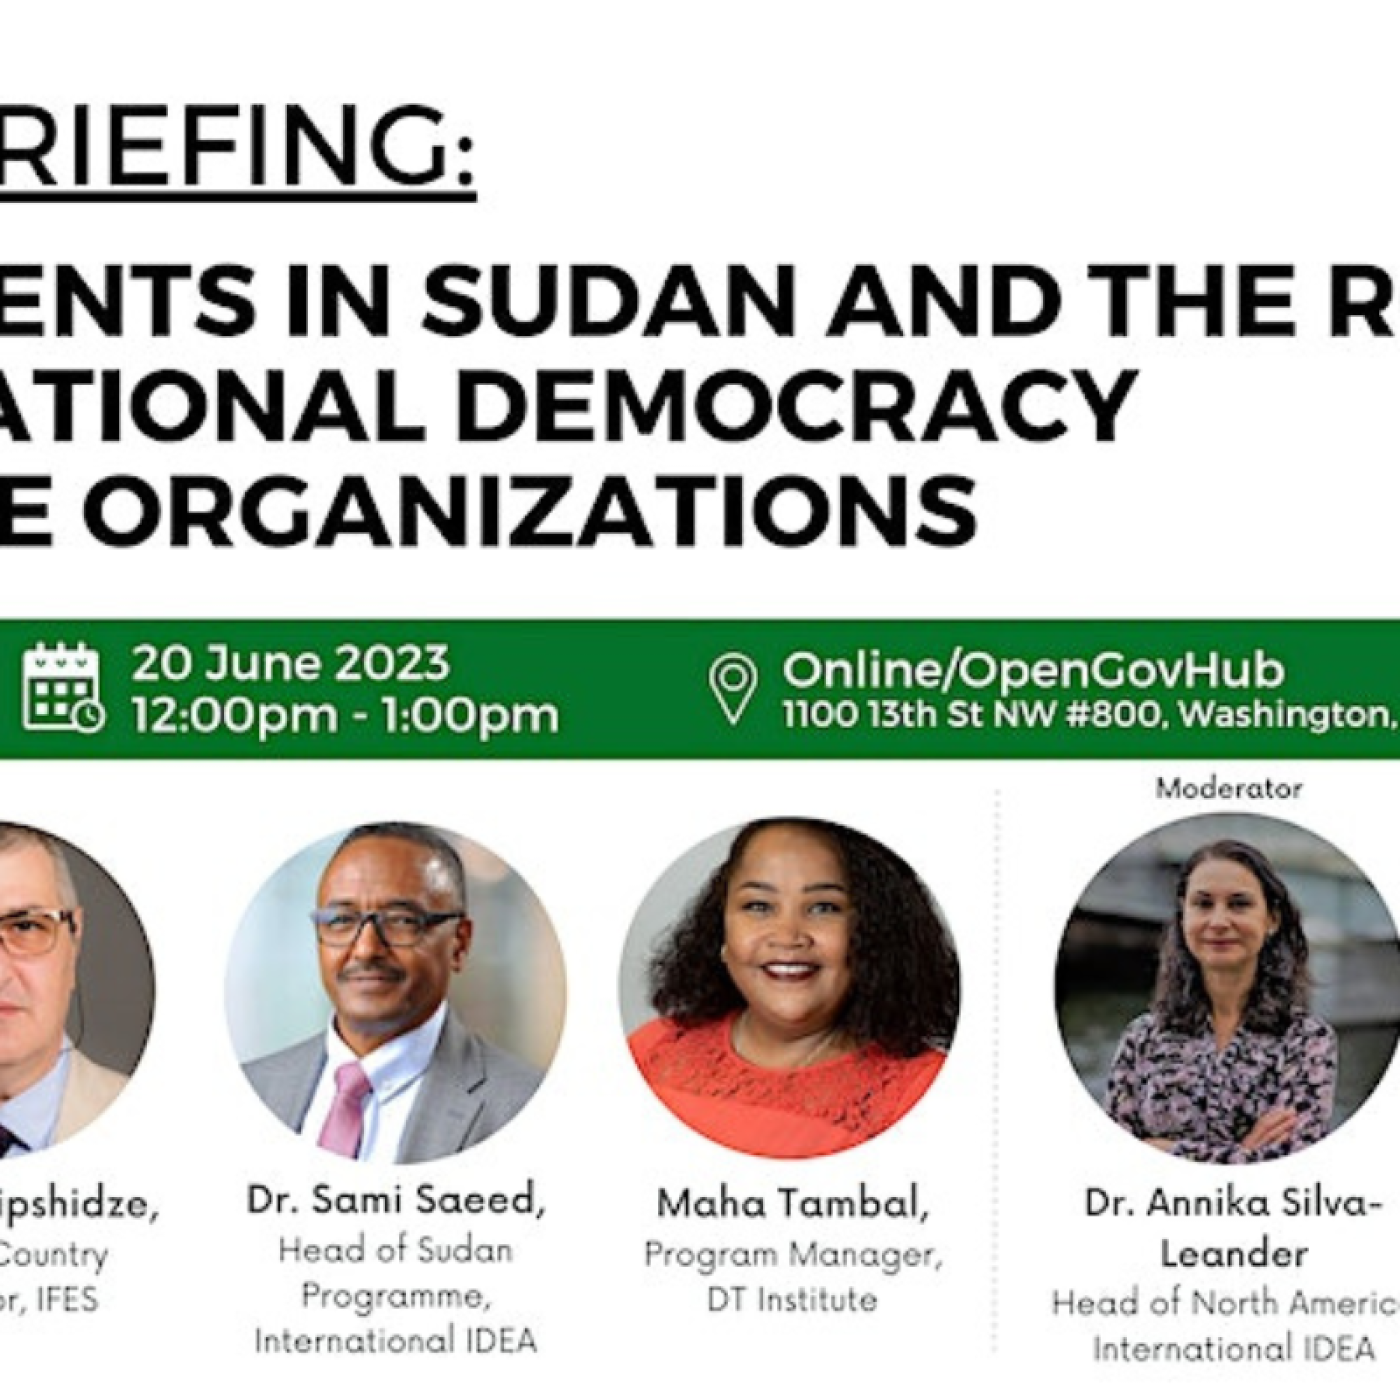 Developments in Sudan and The Role of International Democracy Assistance Organizations